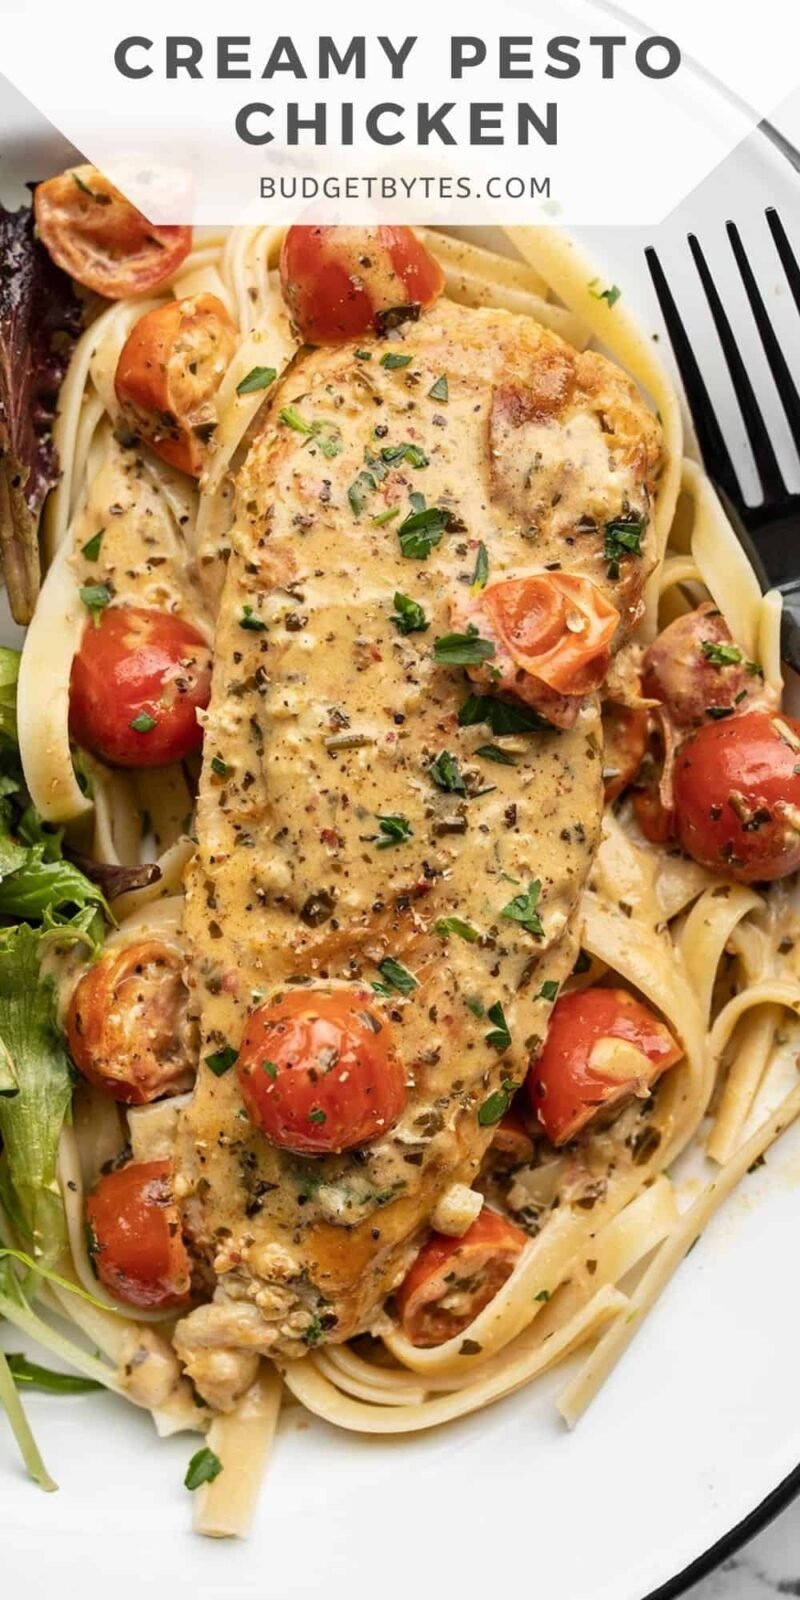 Close up of creamy pesto chicken on a plate with pasta and salad.